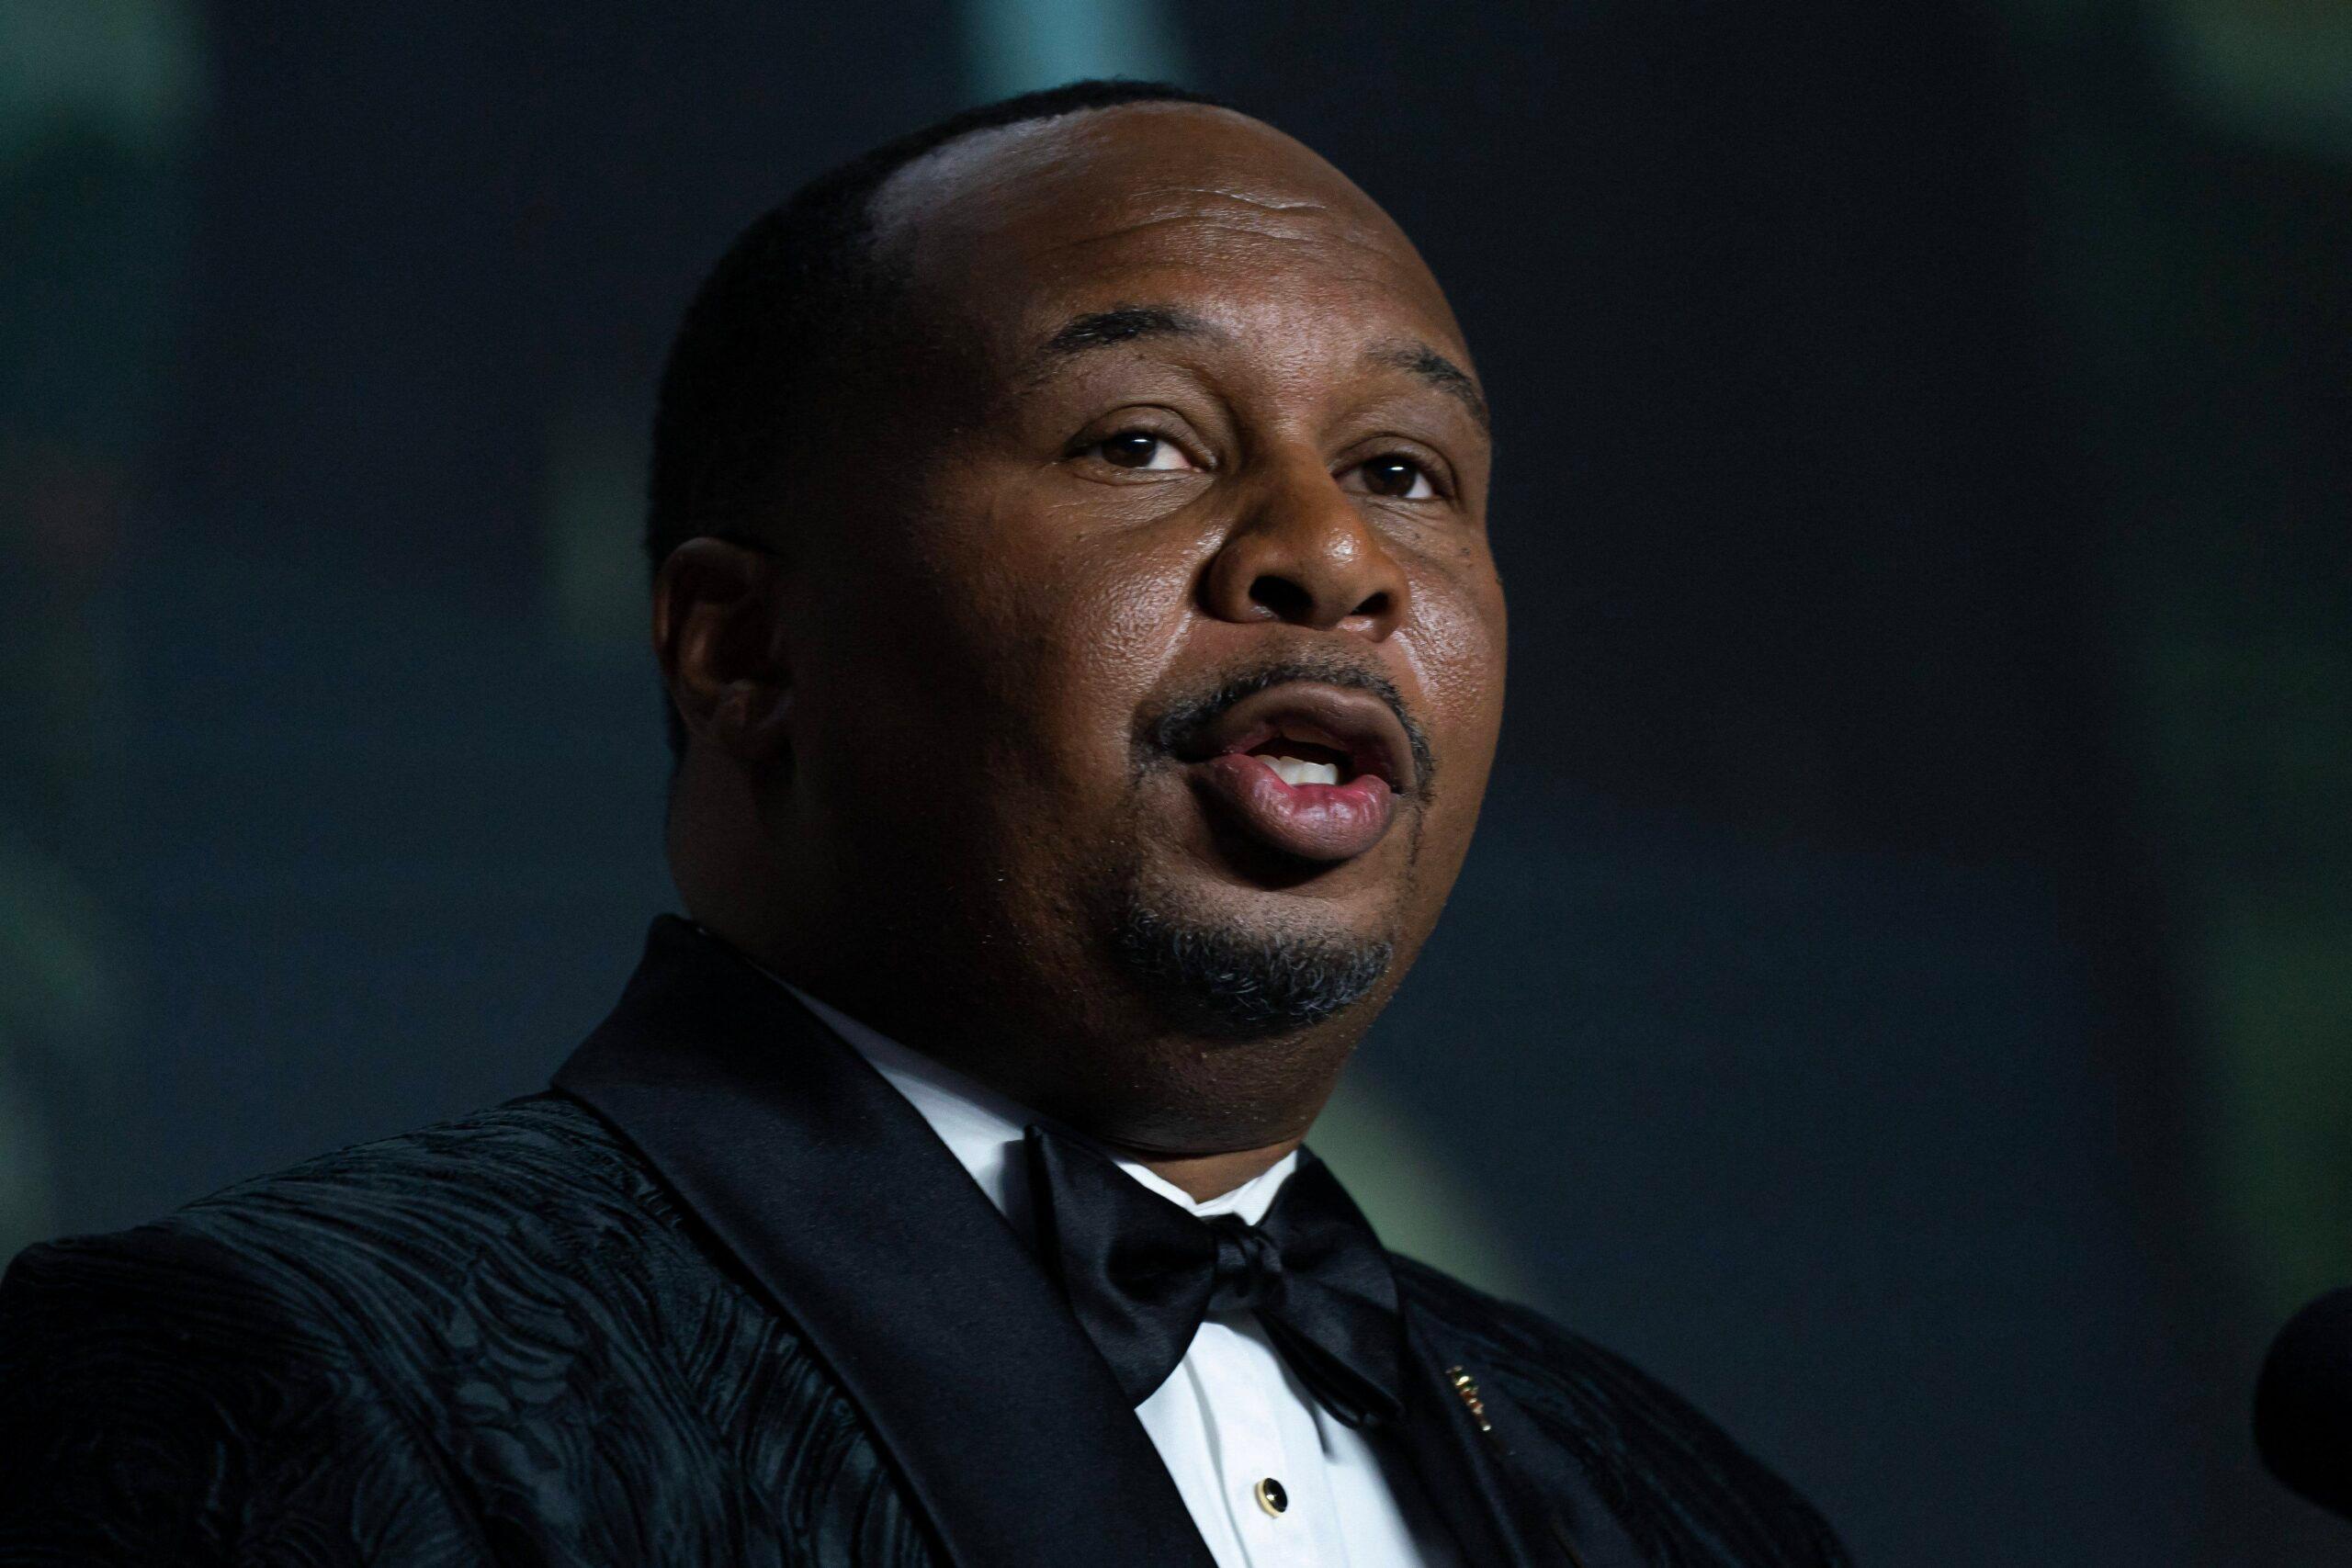 Comedian Roy Wood Jr., speaks during the White House Correspondents' Association (WHCA) dinner in Washington, DC, US, on Saturday, April 29, 2023